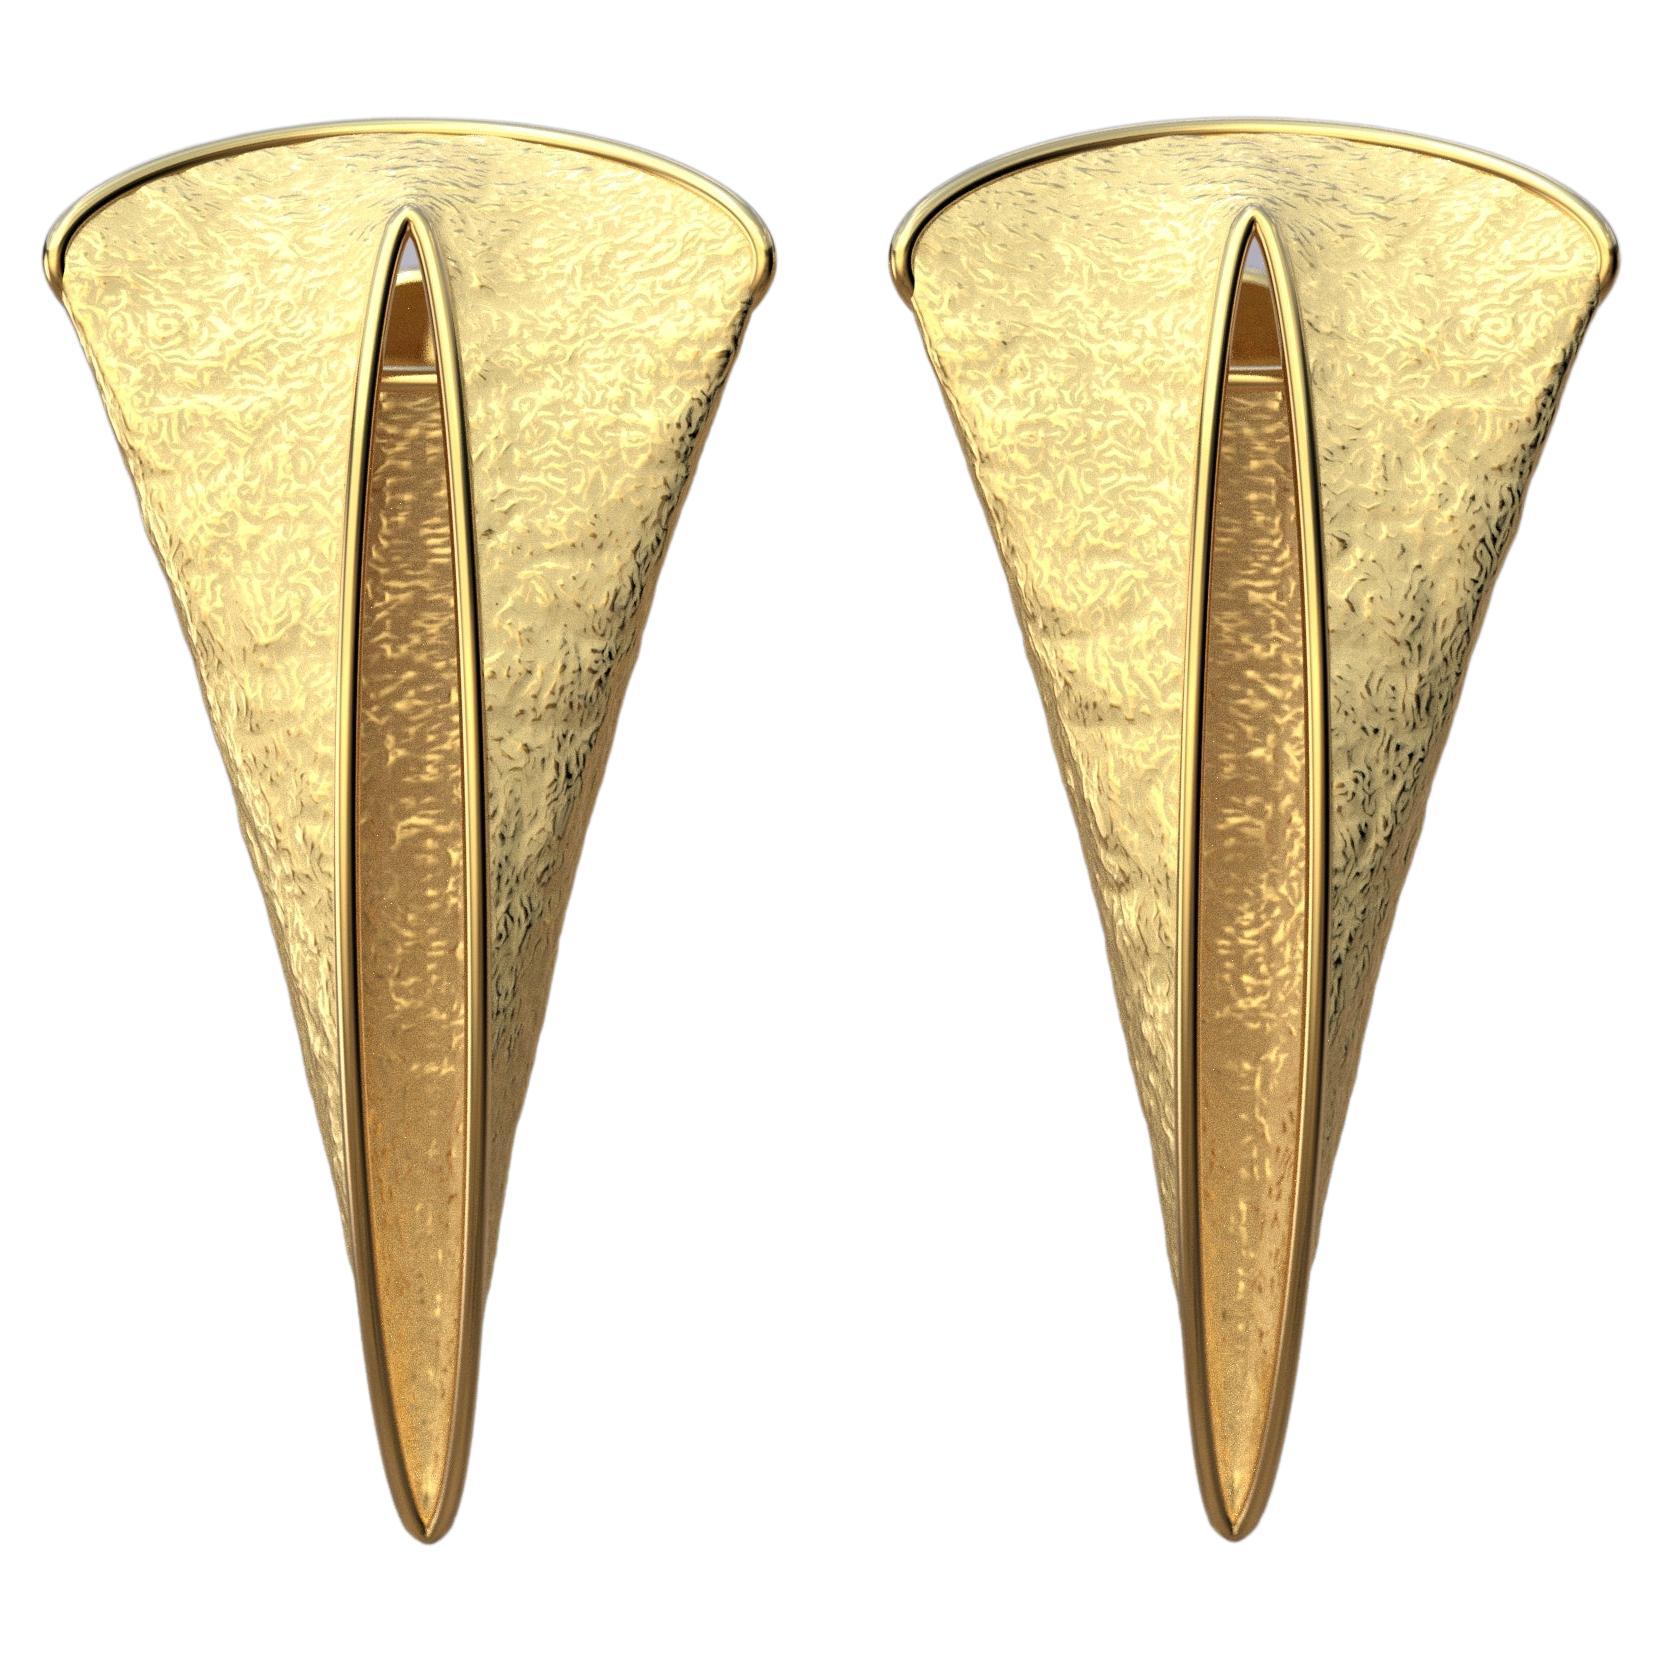 Discover our exquisite Thorn-shaped Contemporary Earrings in 14k Genuine Gold, meticulously crafted in the heart of Italy by the renowned artisans at Oltremare Gioielli. These remarkable earrings are a true testament to the fusion of modern design